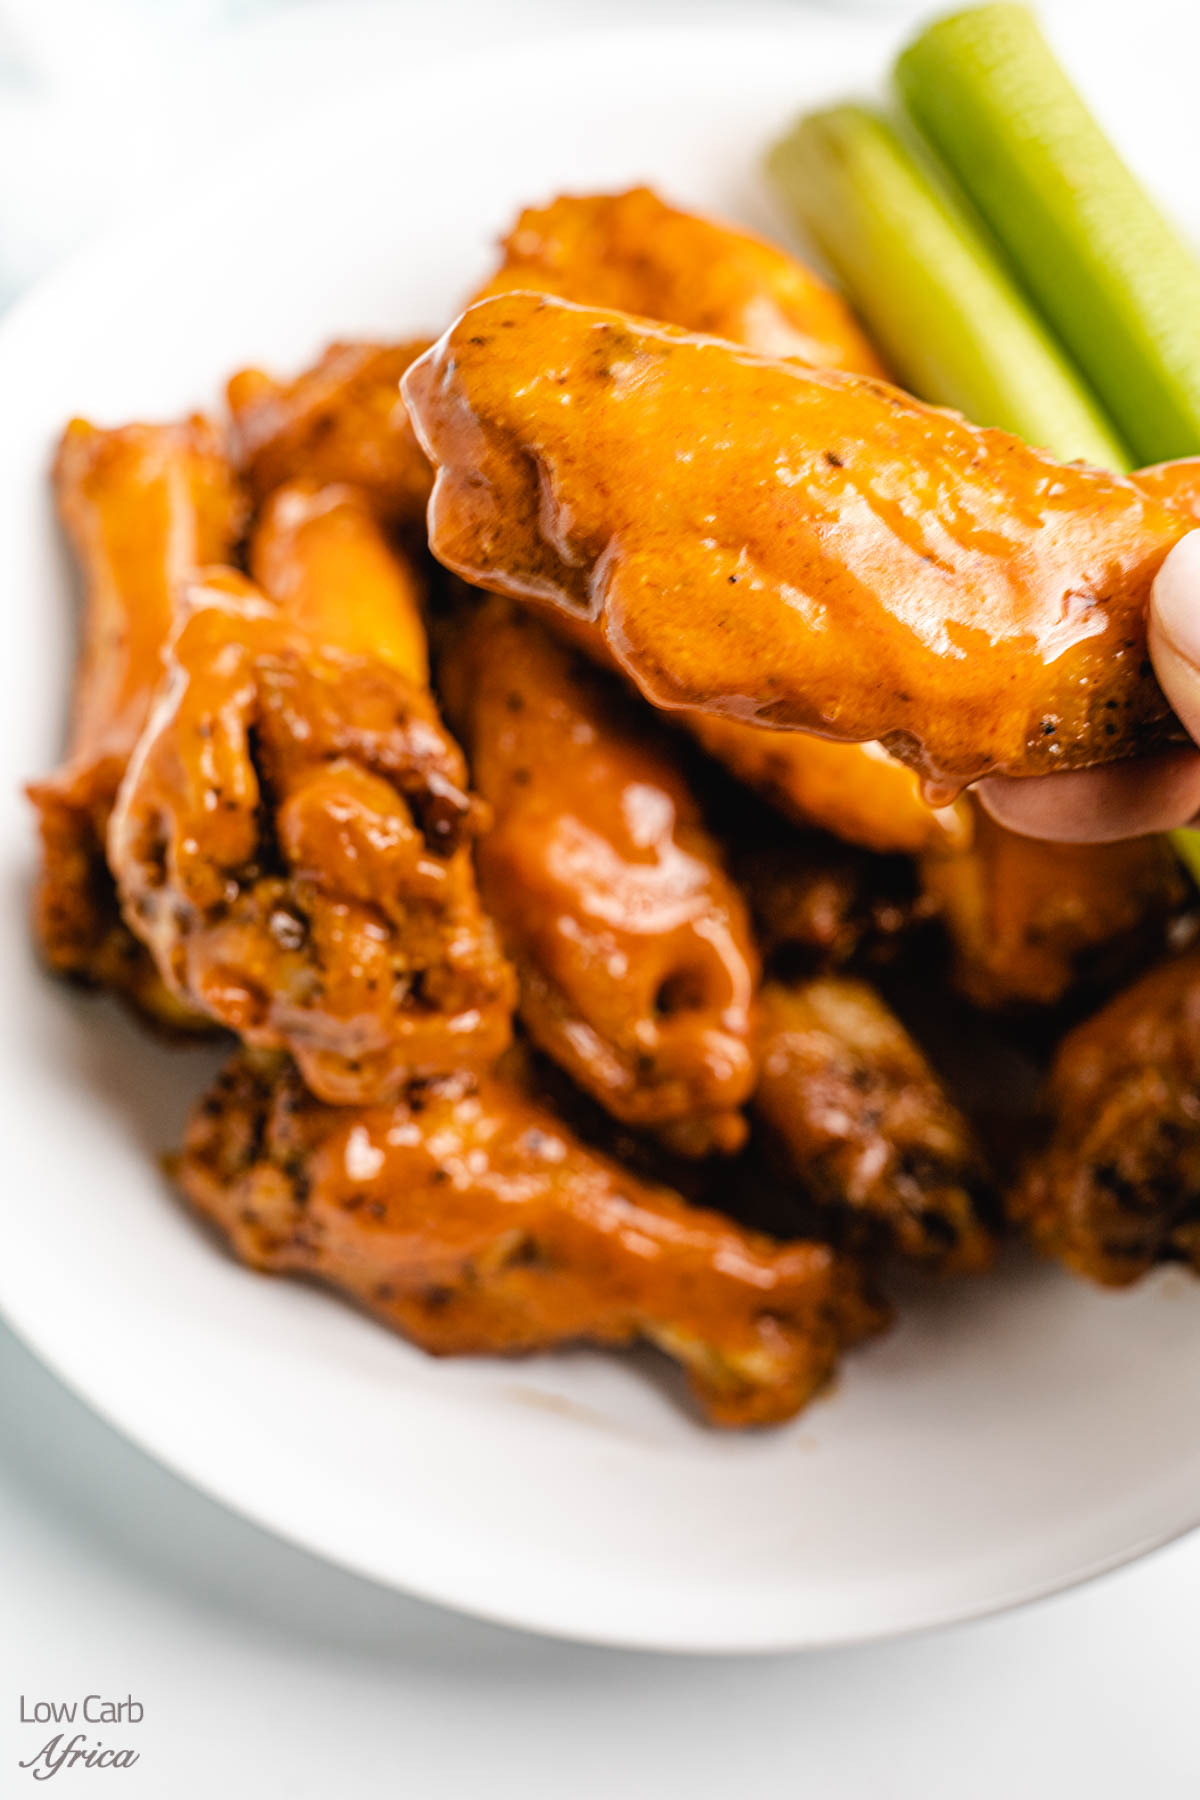 keto buffalo wings with celery on the side on a white plate.